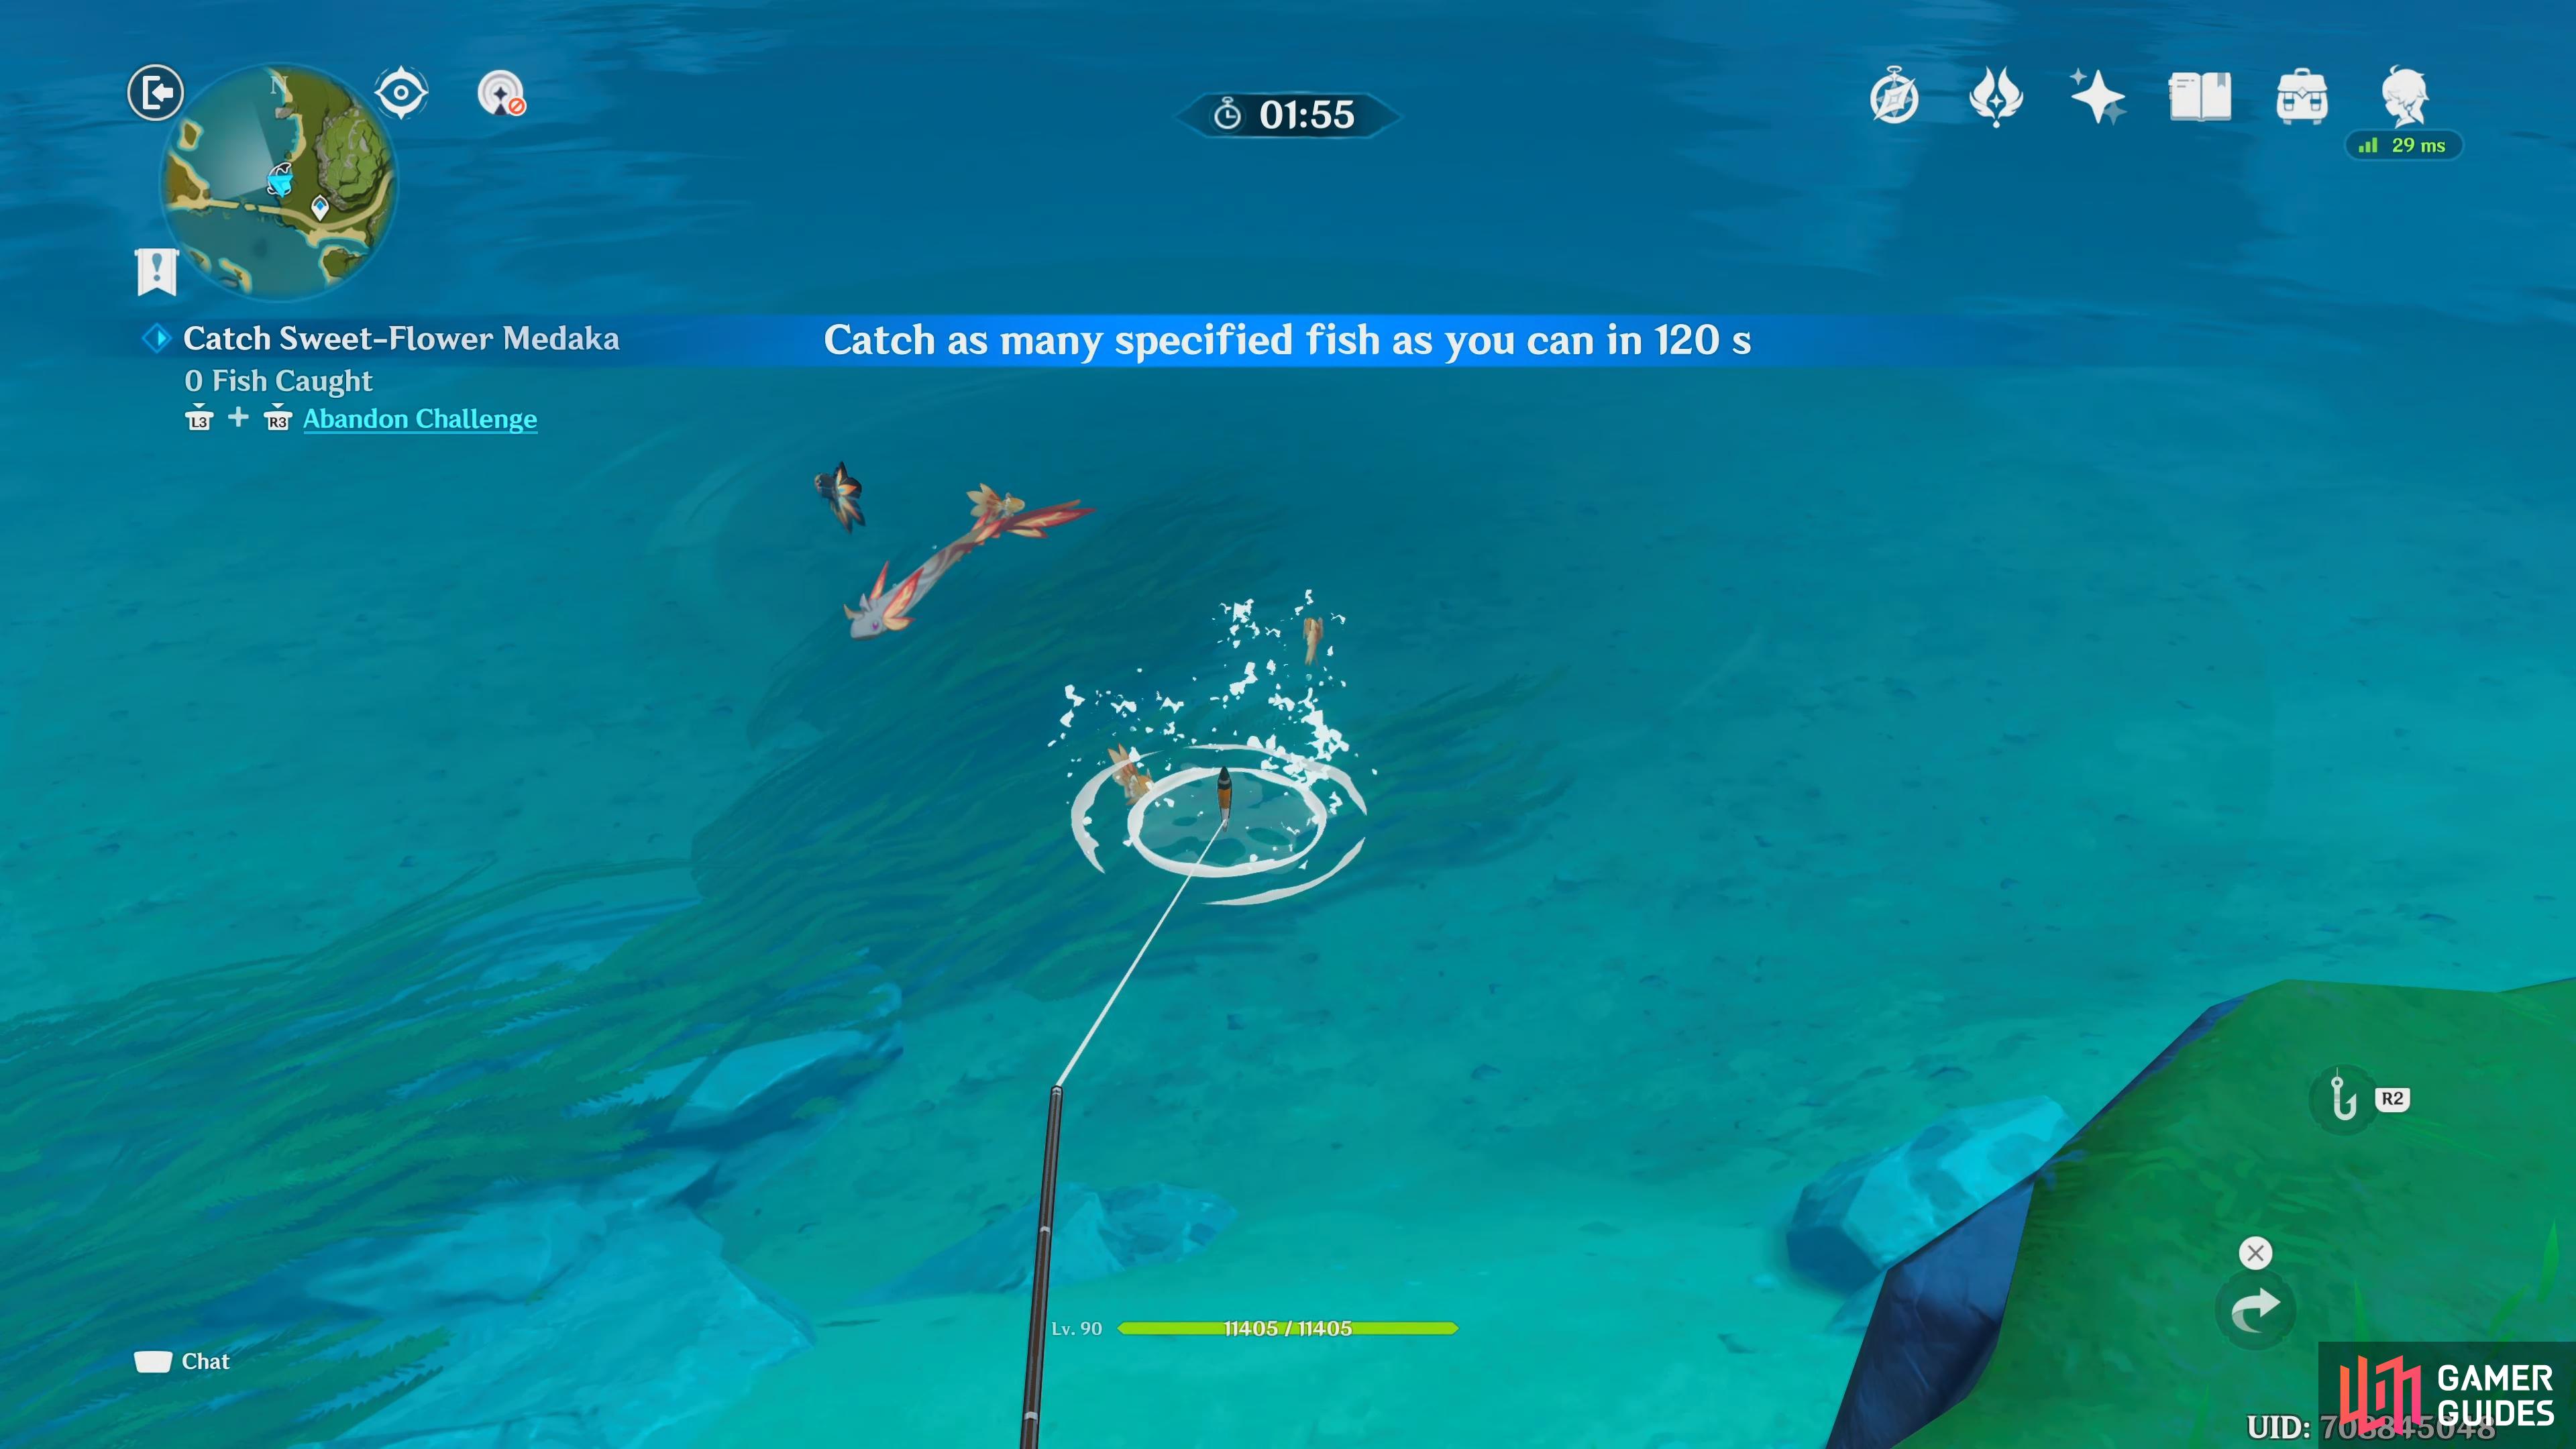 Here's a visual of the Fishing Point.